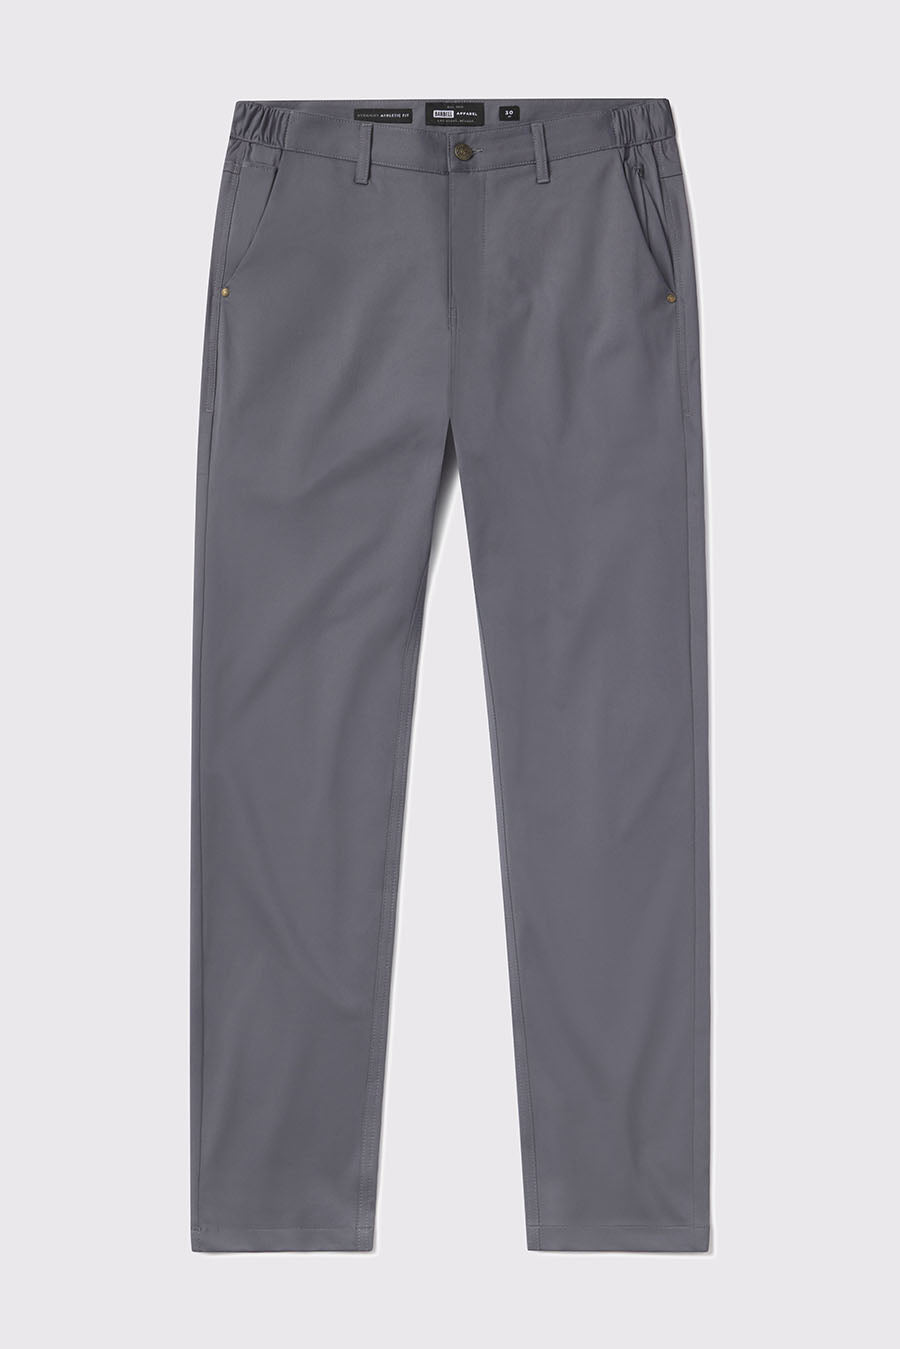 Anything Dress Pant - Slate - photo from front flat lay #color_slate